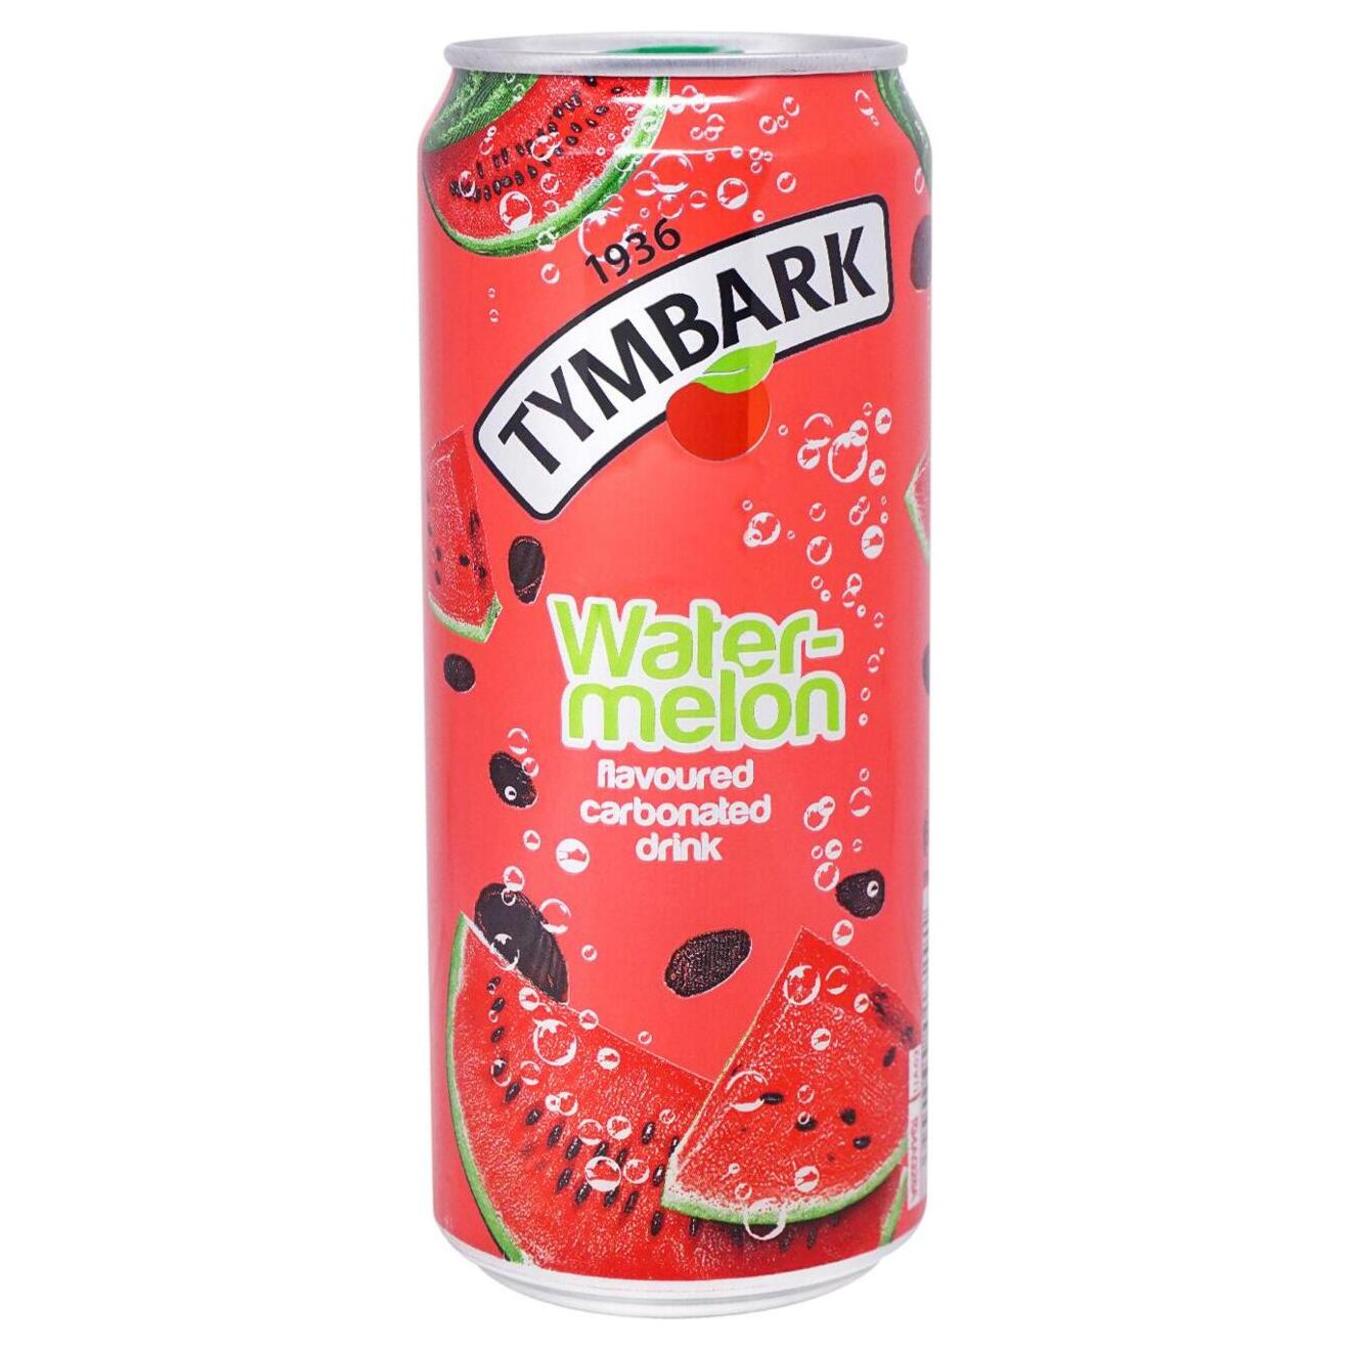 Carbonated drink Tymbark watermelon 0.33 iron can